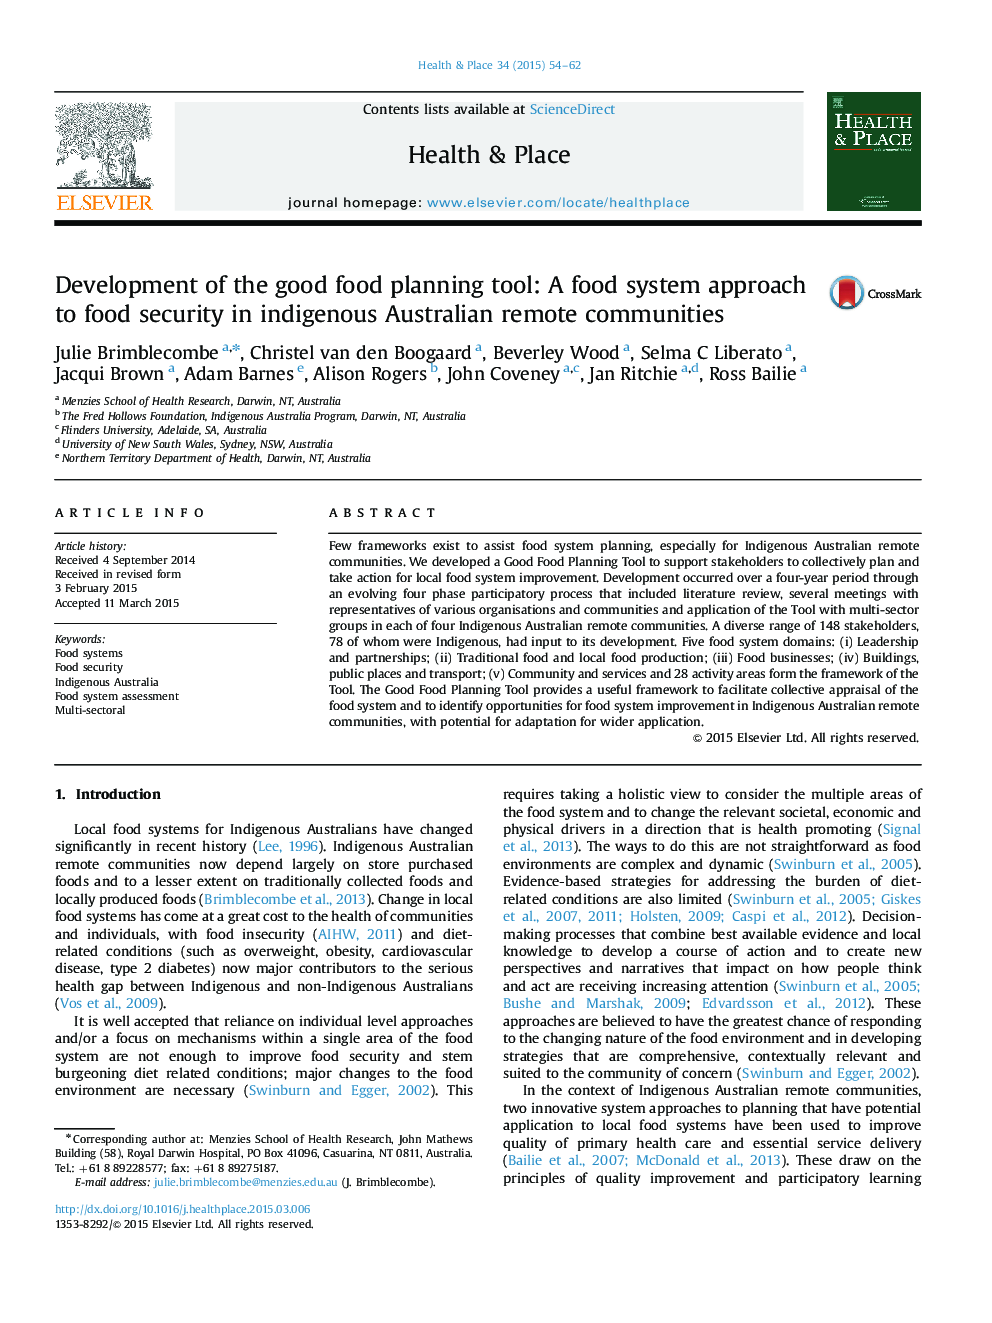 Development of the good food planning tool: A food system approach to food security in indigenous Australian remote communities